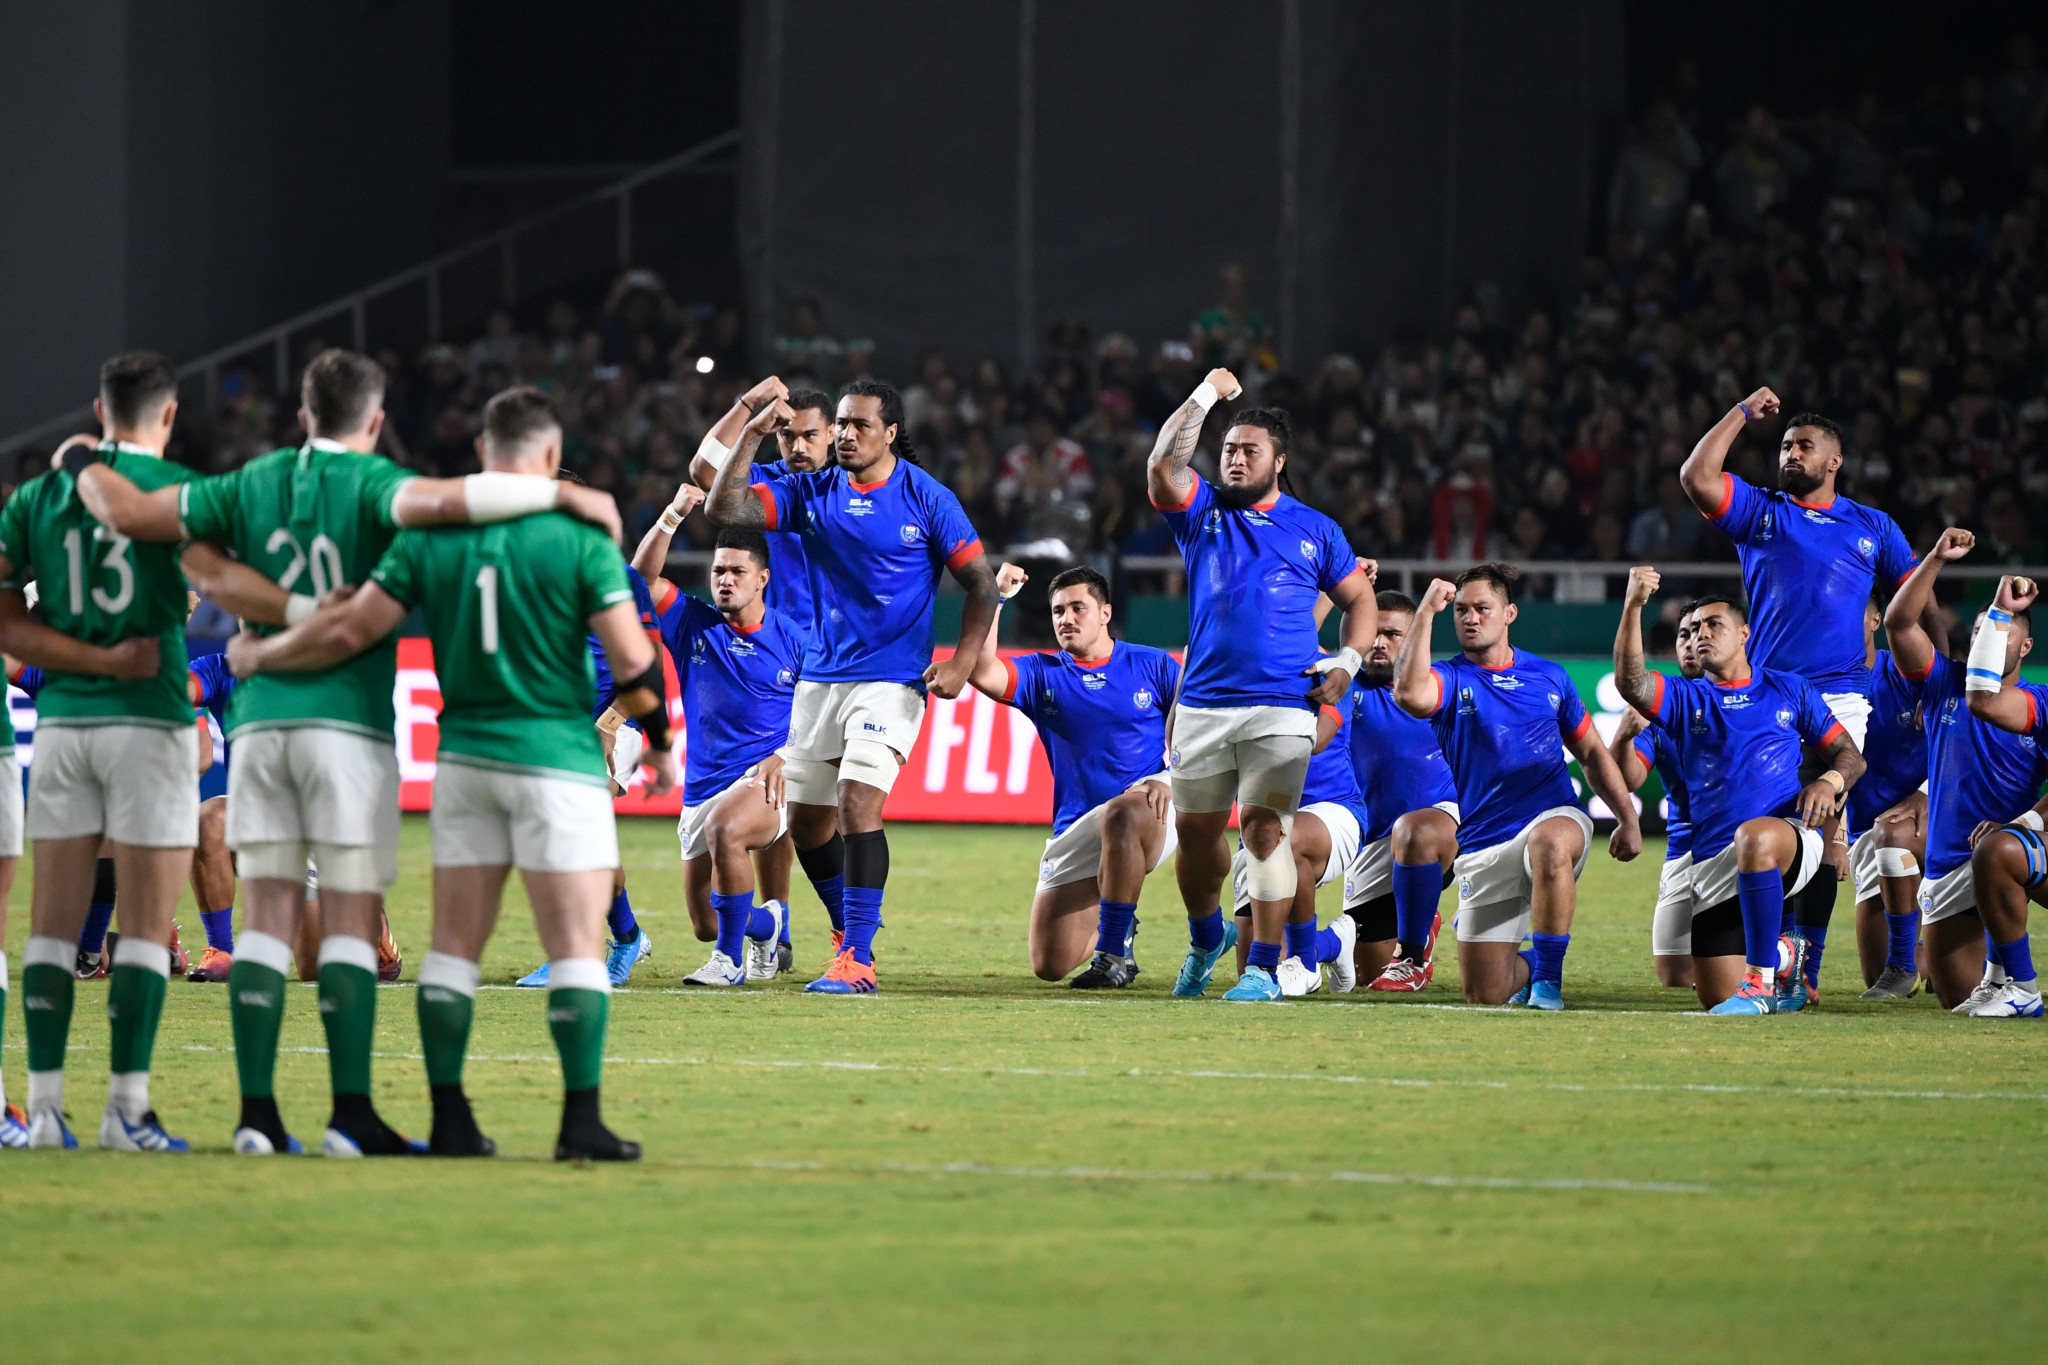 Ireland finally show their class at Rugby World Cup